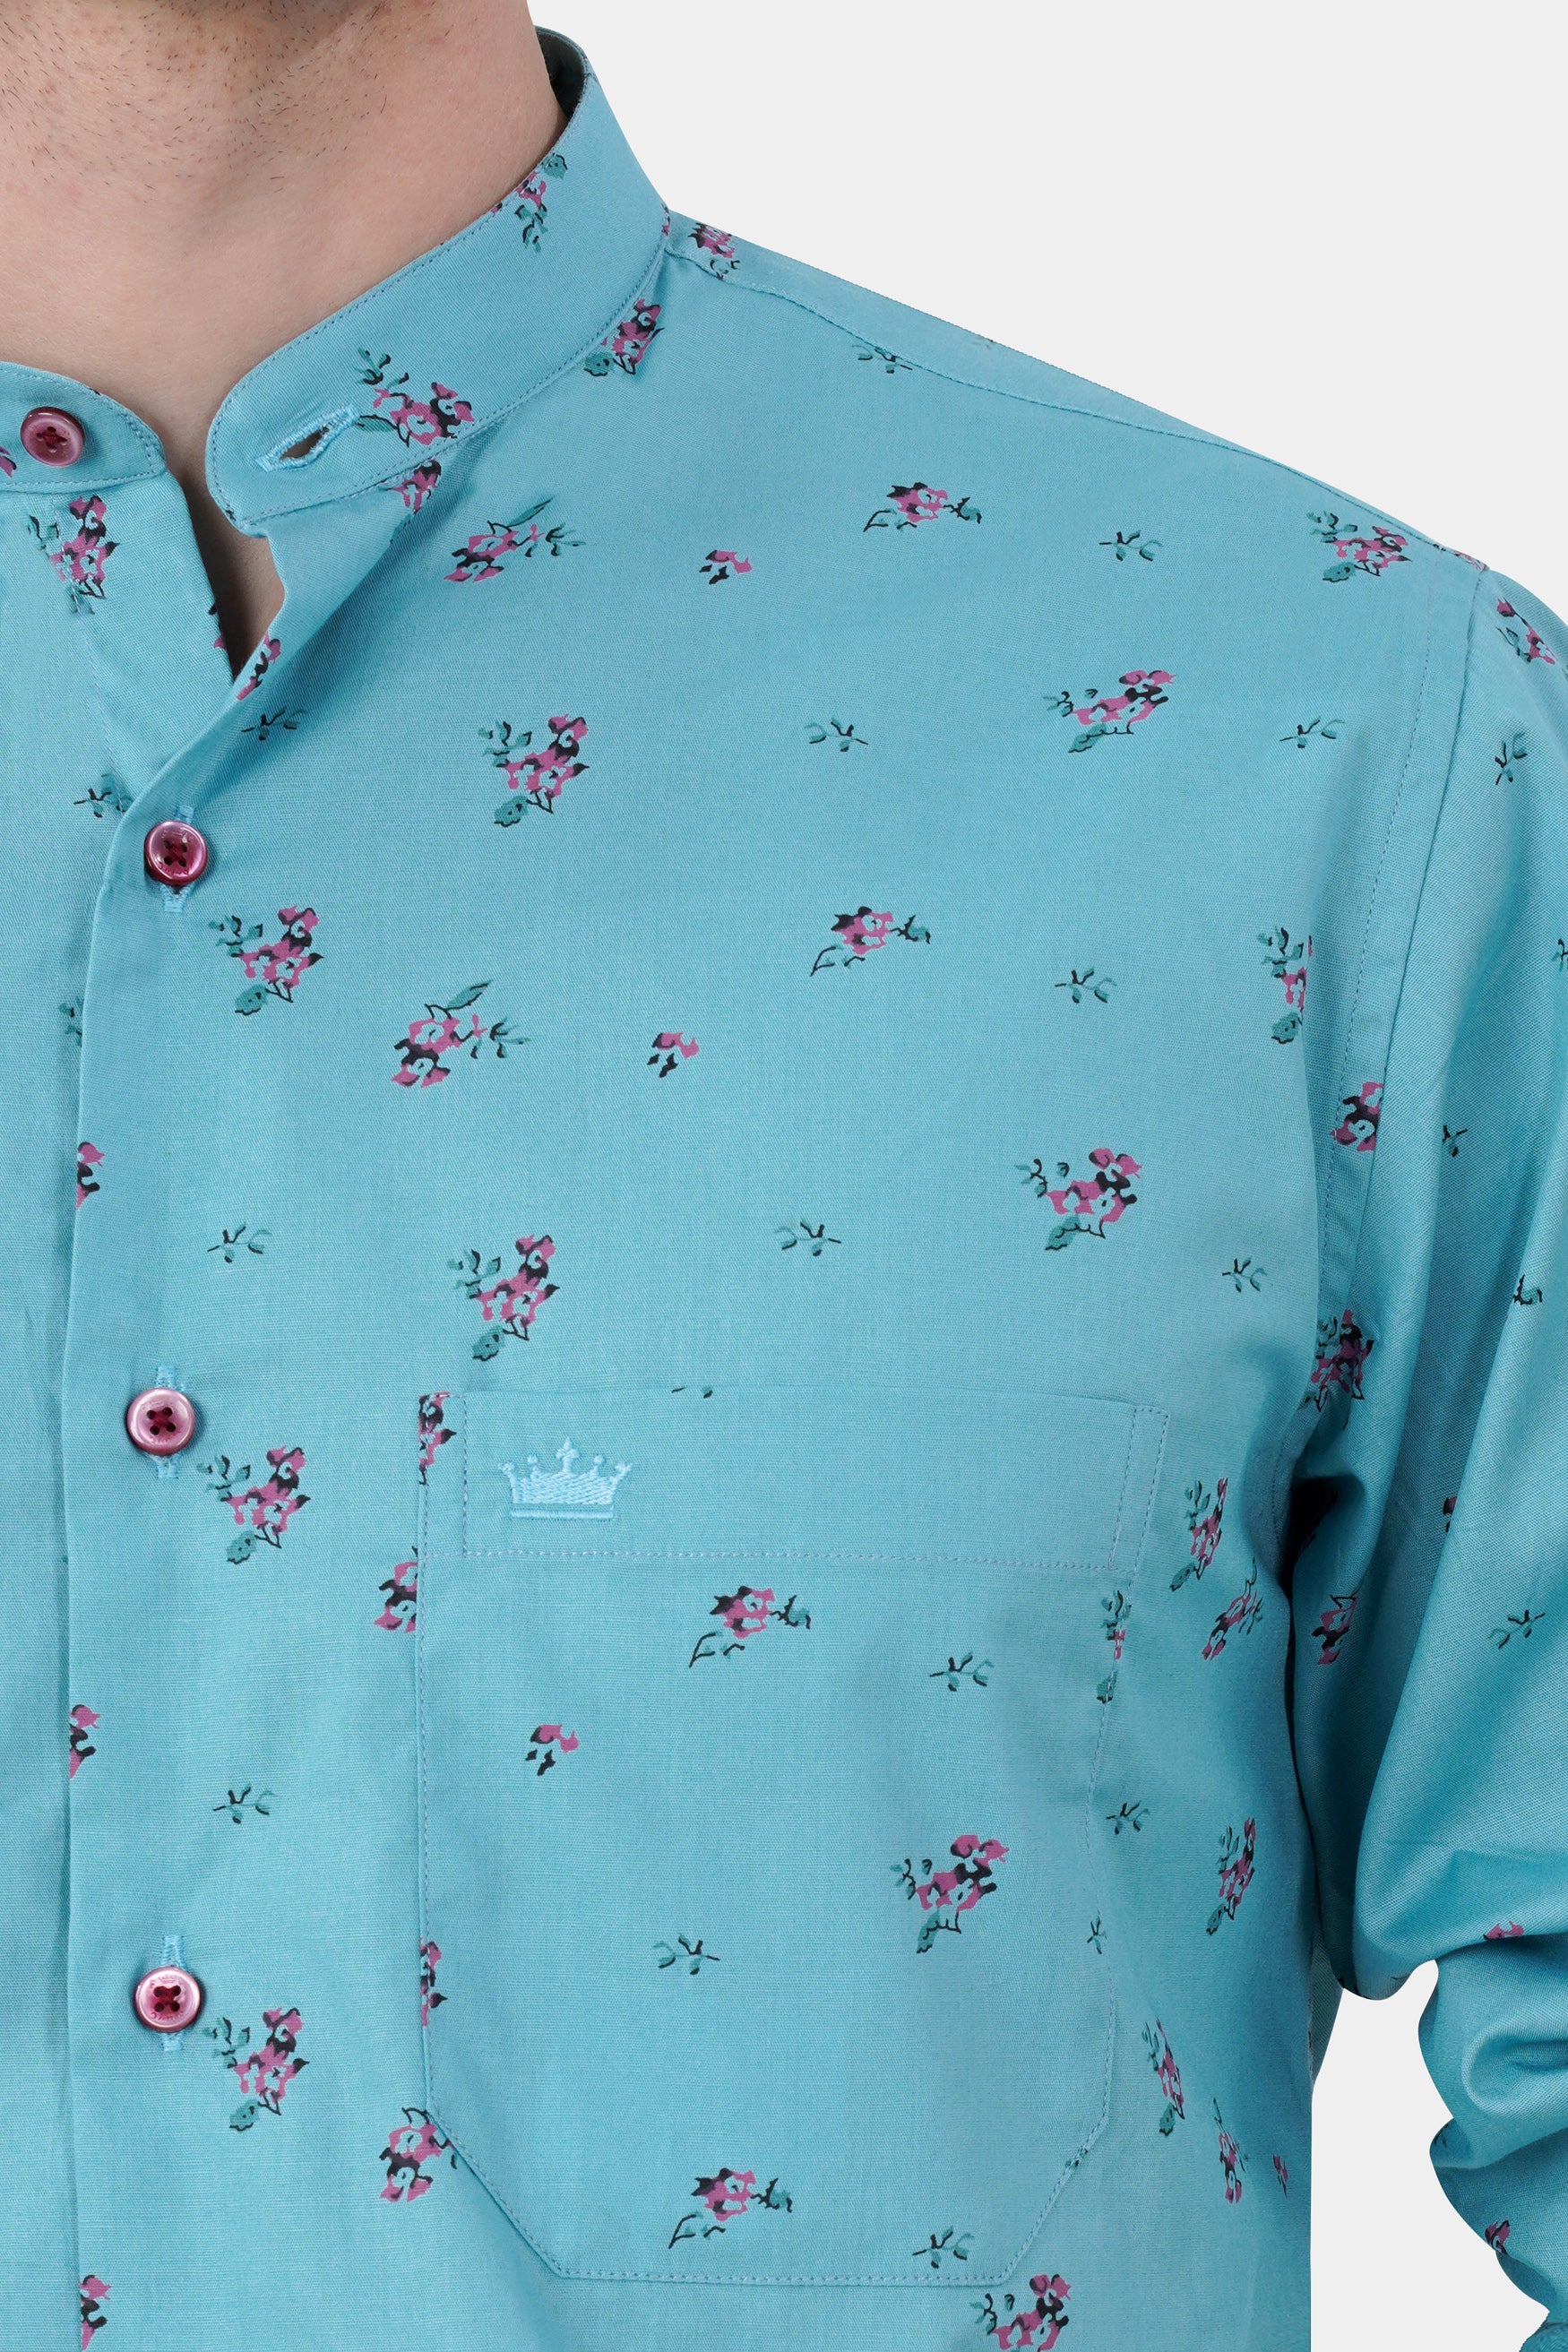 Glacier Blue and Fuchsia Pink Ditsy Printed Premium Cotton Shirt 11713-M-MN-38, 11713-M-MN-H-38, 11713-M-MN-39, 11713-M-MN-H-39, 11713-M-MN-40, 11713-M-MN-H-40, 11713-M-MN-42, 11713-M-MN-H-42, 11713-M-MN-44, 11713-M-MN-H-44, 11713-M-MN-46, 11713-M-MN-H-46, 11713-M-MN-48, 11713-M-MN-H-48, 11713-M-MN-50, 11713-M-MN-H-50, 11713-M-MN-52, 11713-M-MN-H-52